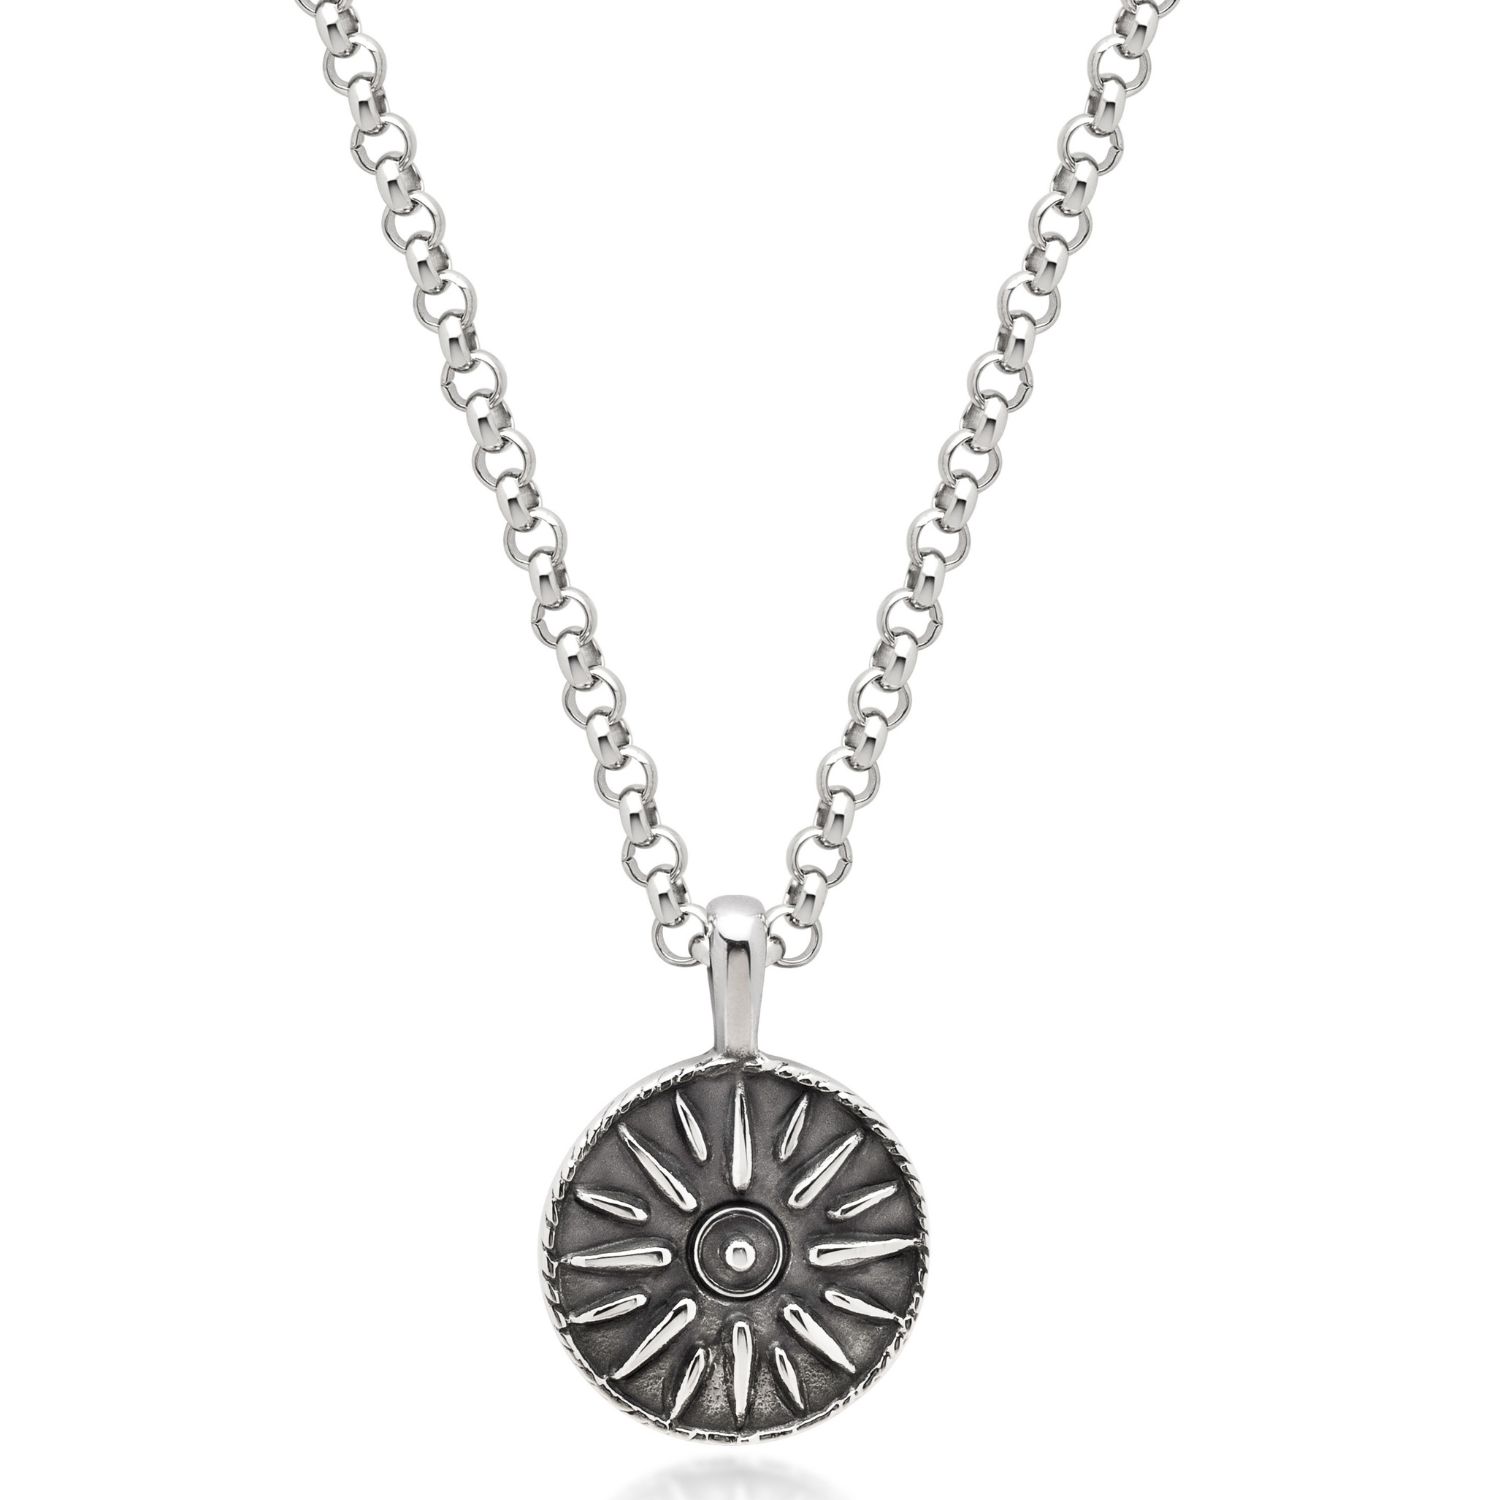 Nialaya Men's Silver Necklace With Ancient Sun Pendant